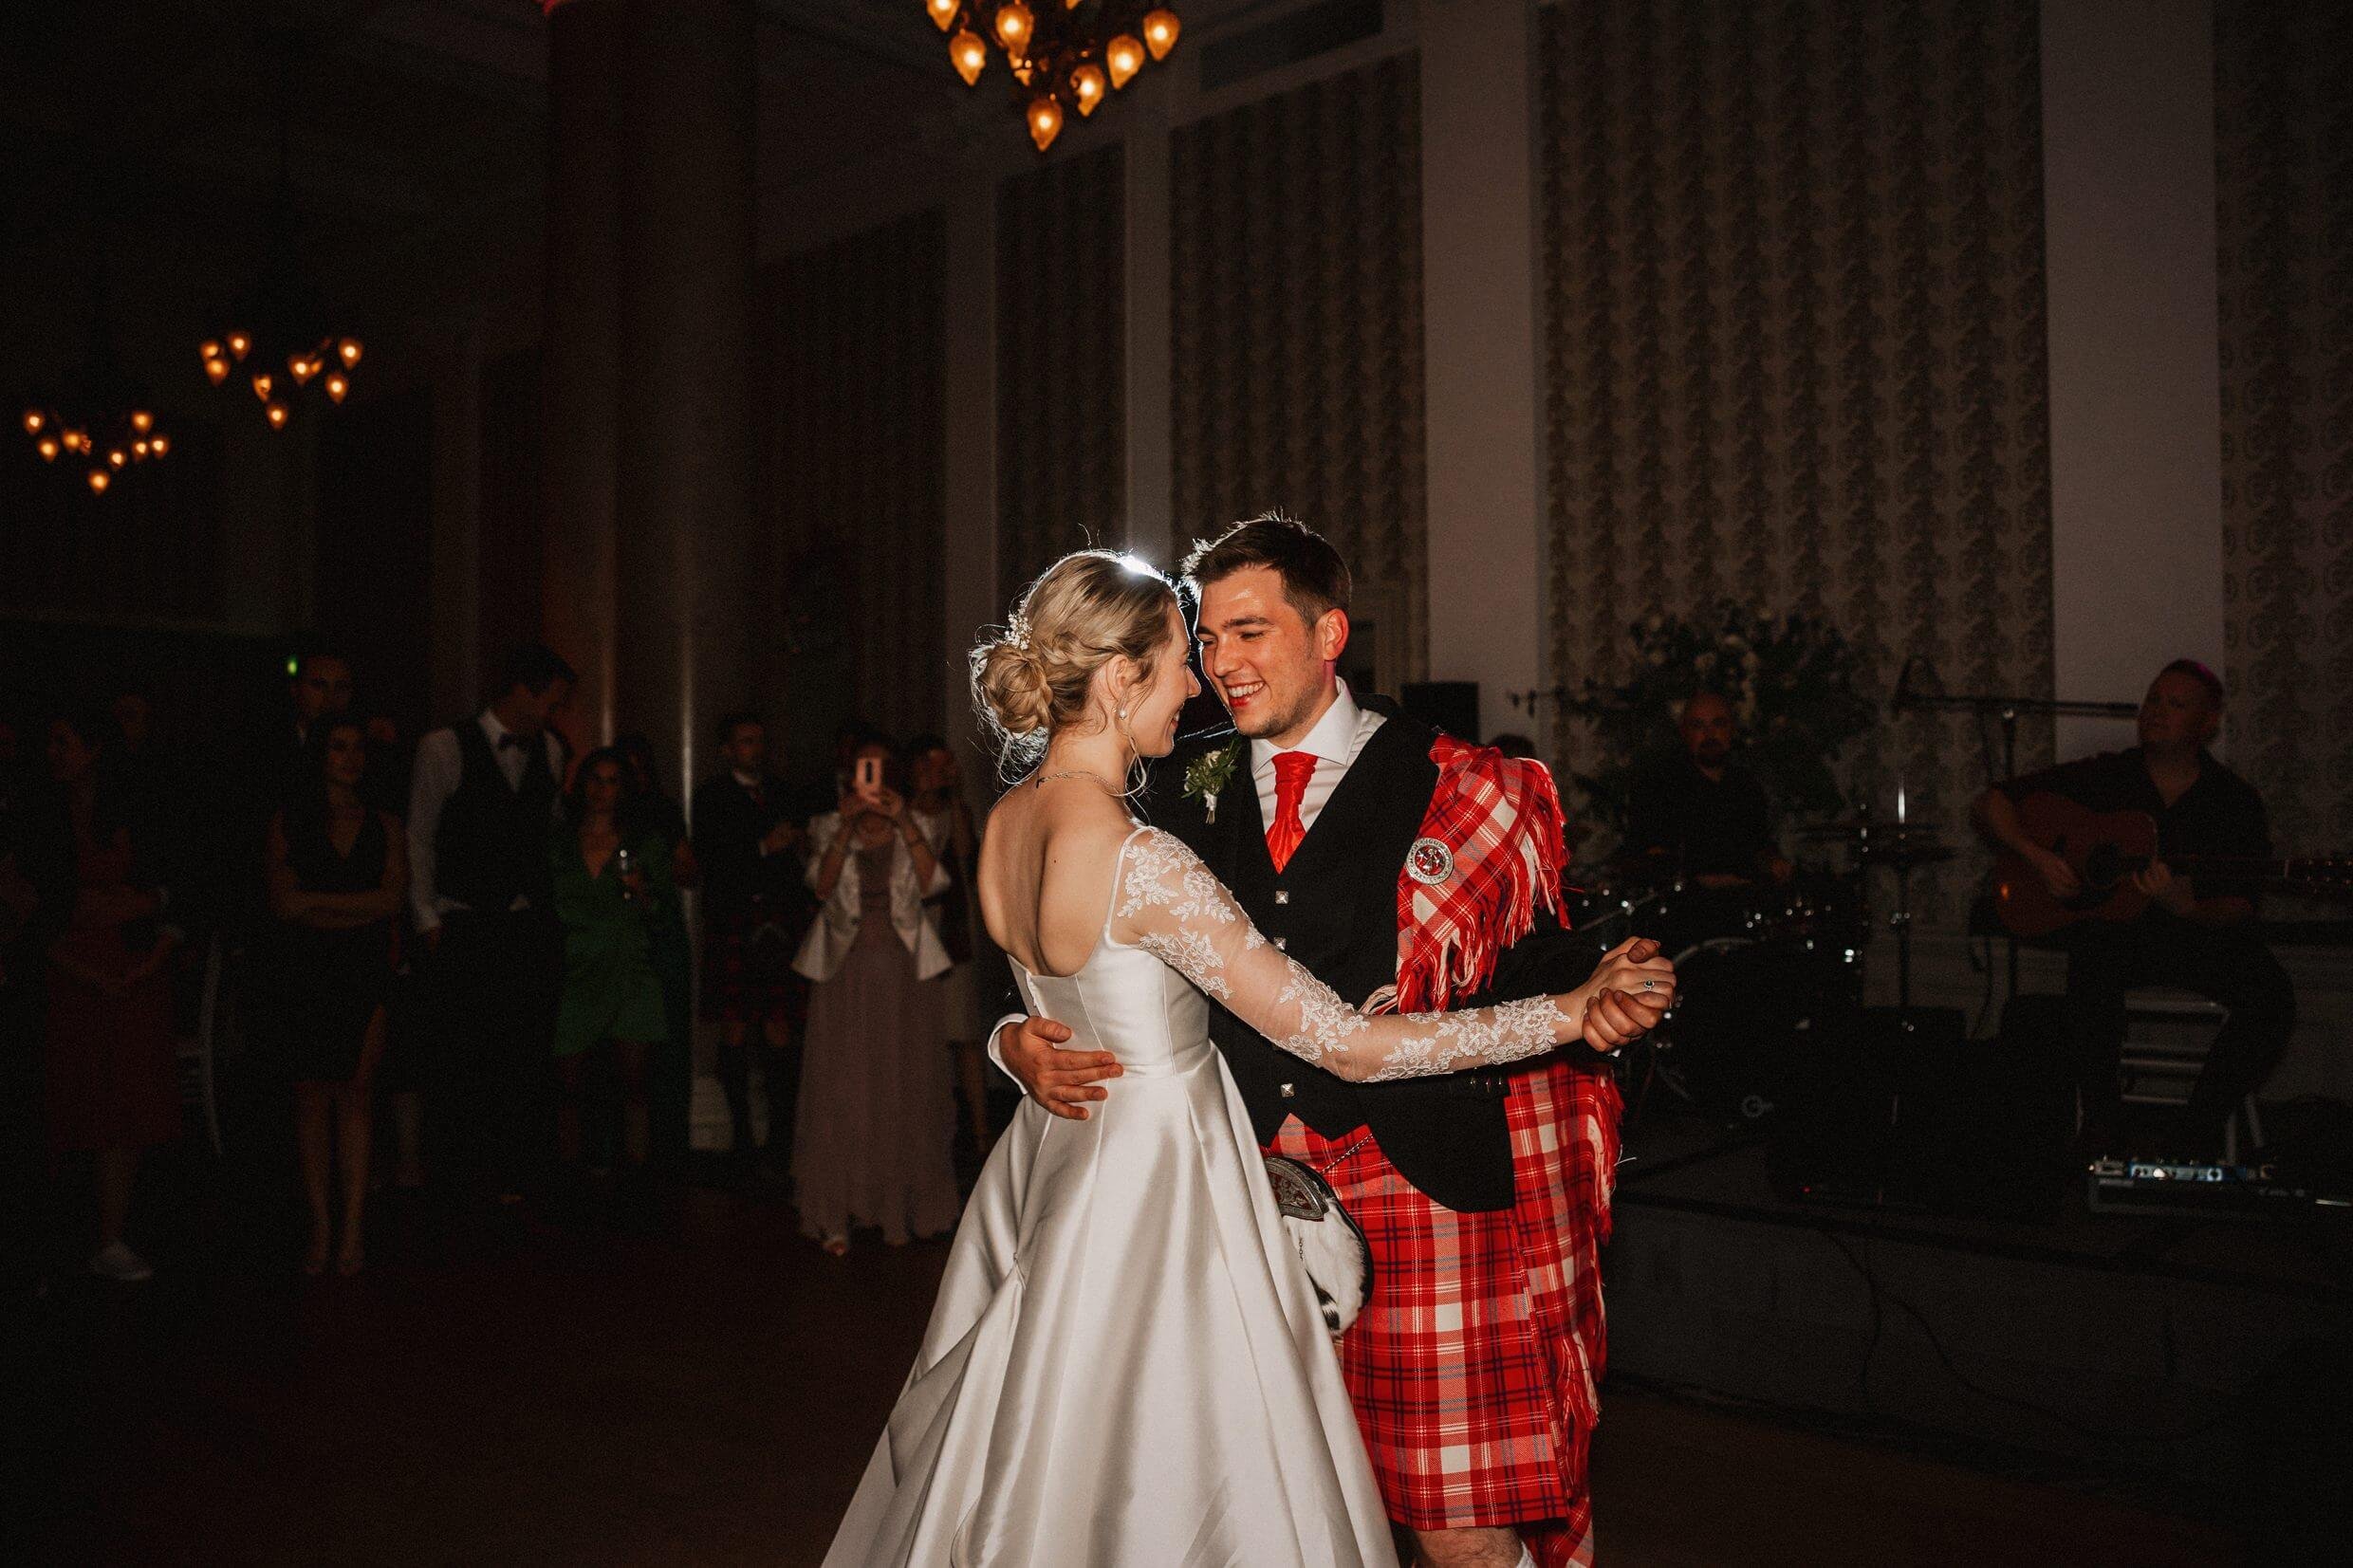 the bride and groom's first dance at the balmoral hotel edinburgh wedding venue in scotland with the band visible in the background